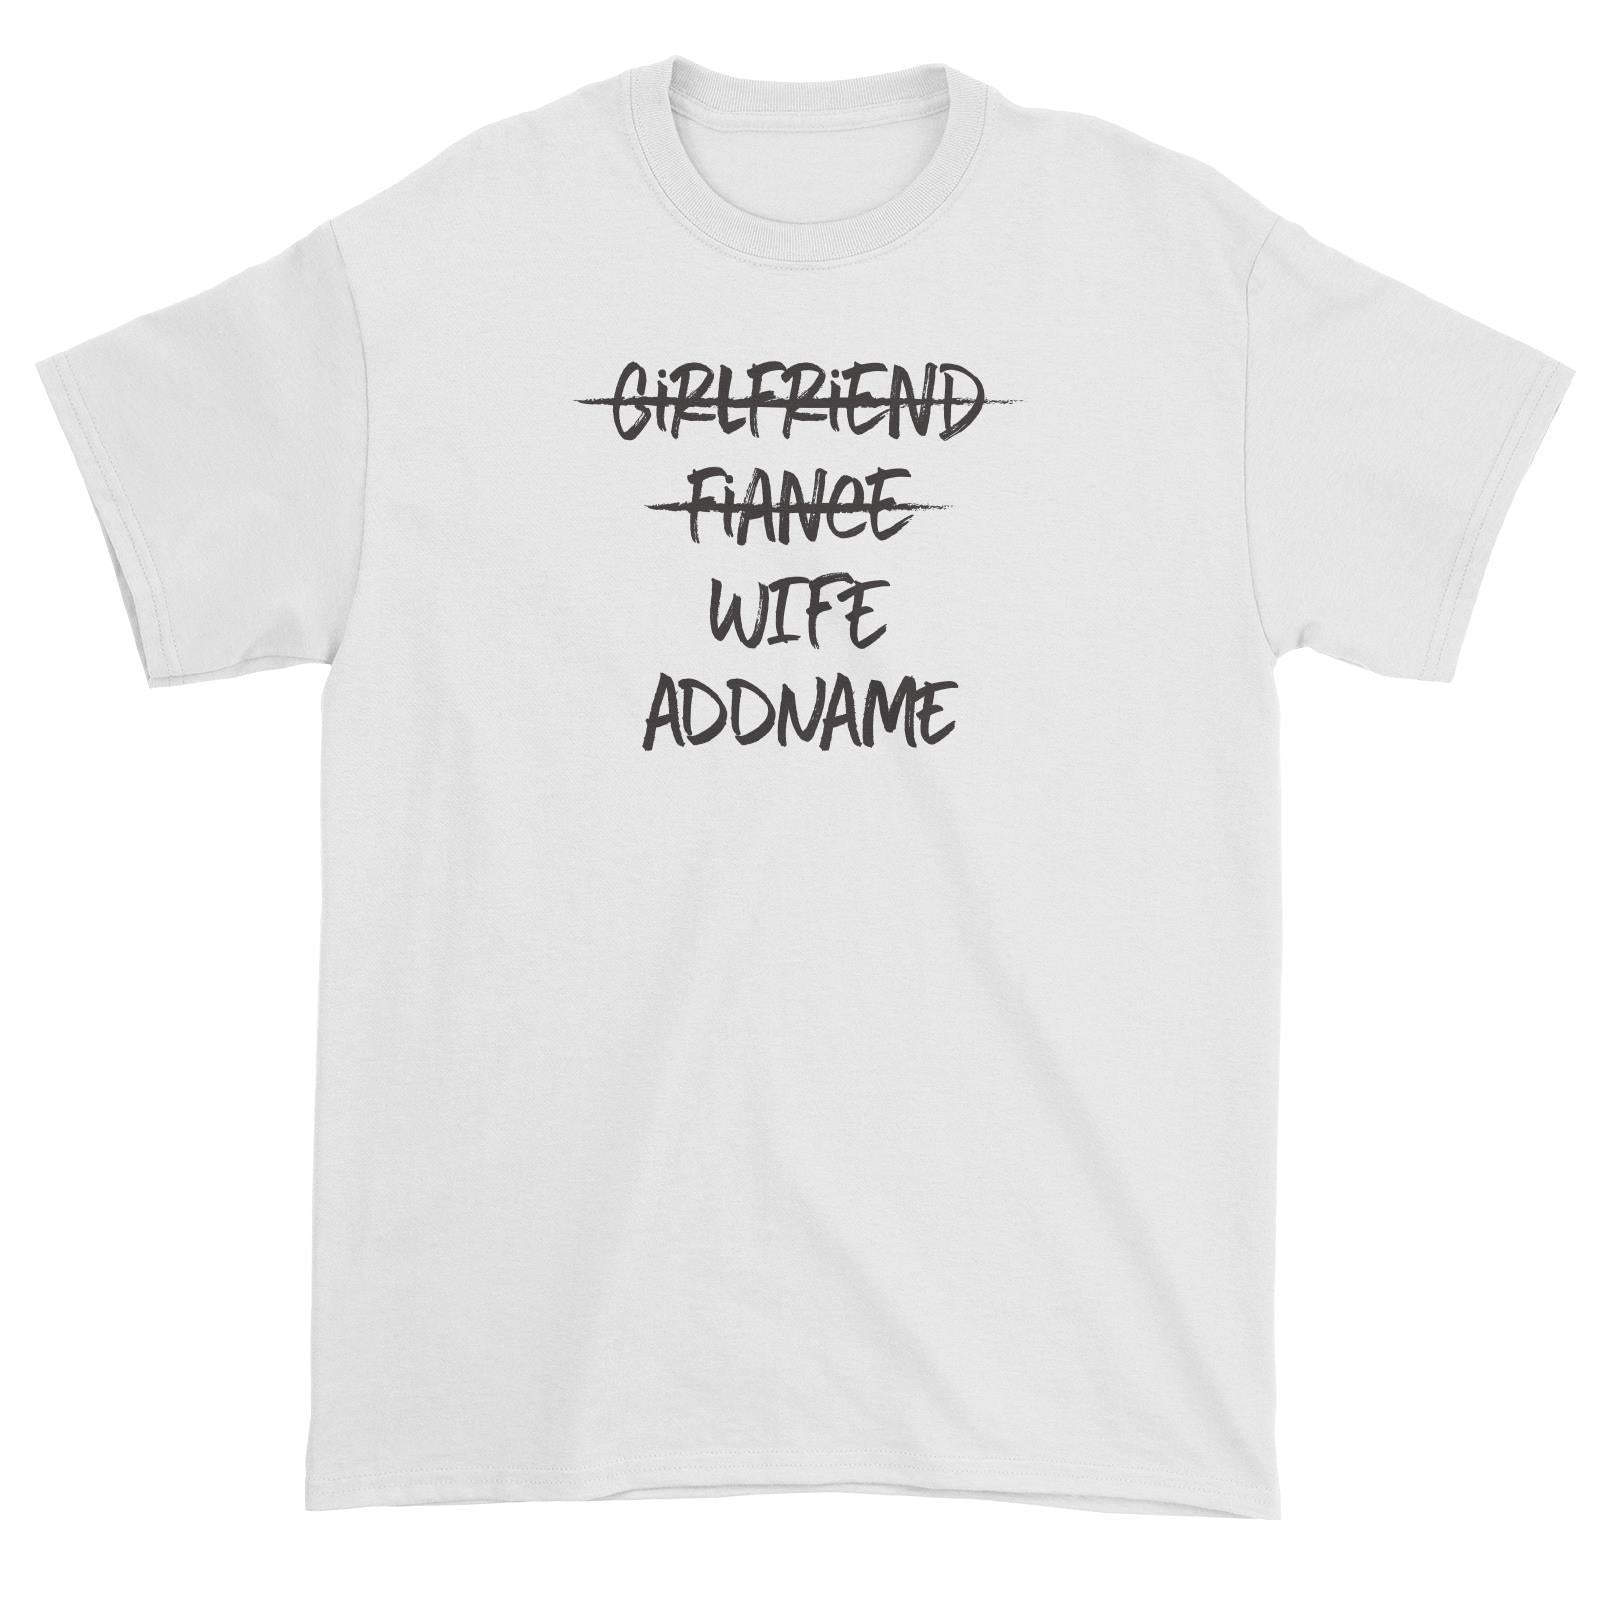 Husband and Wife Girlfriend Fiance Wife Addname Unisex T-Shirt